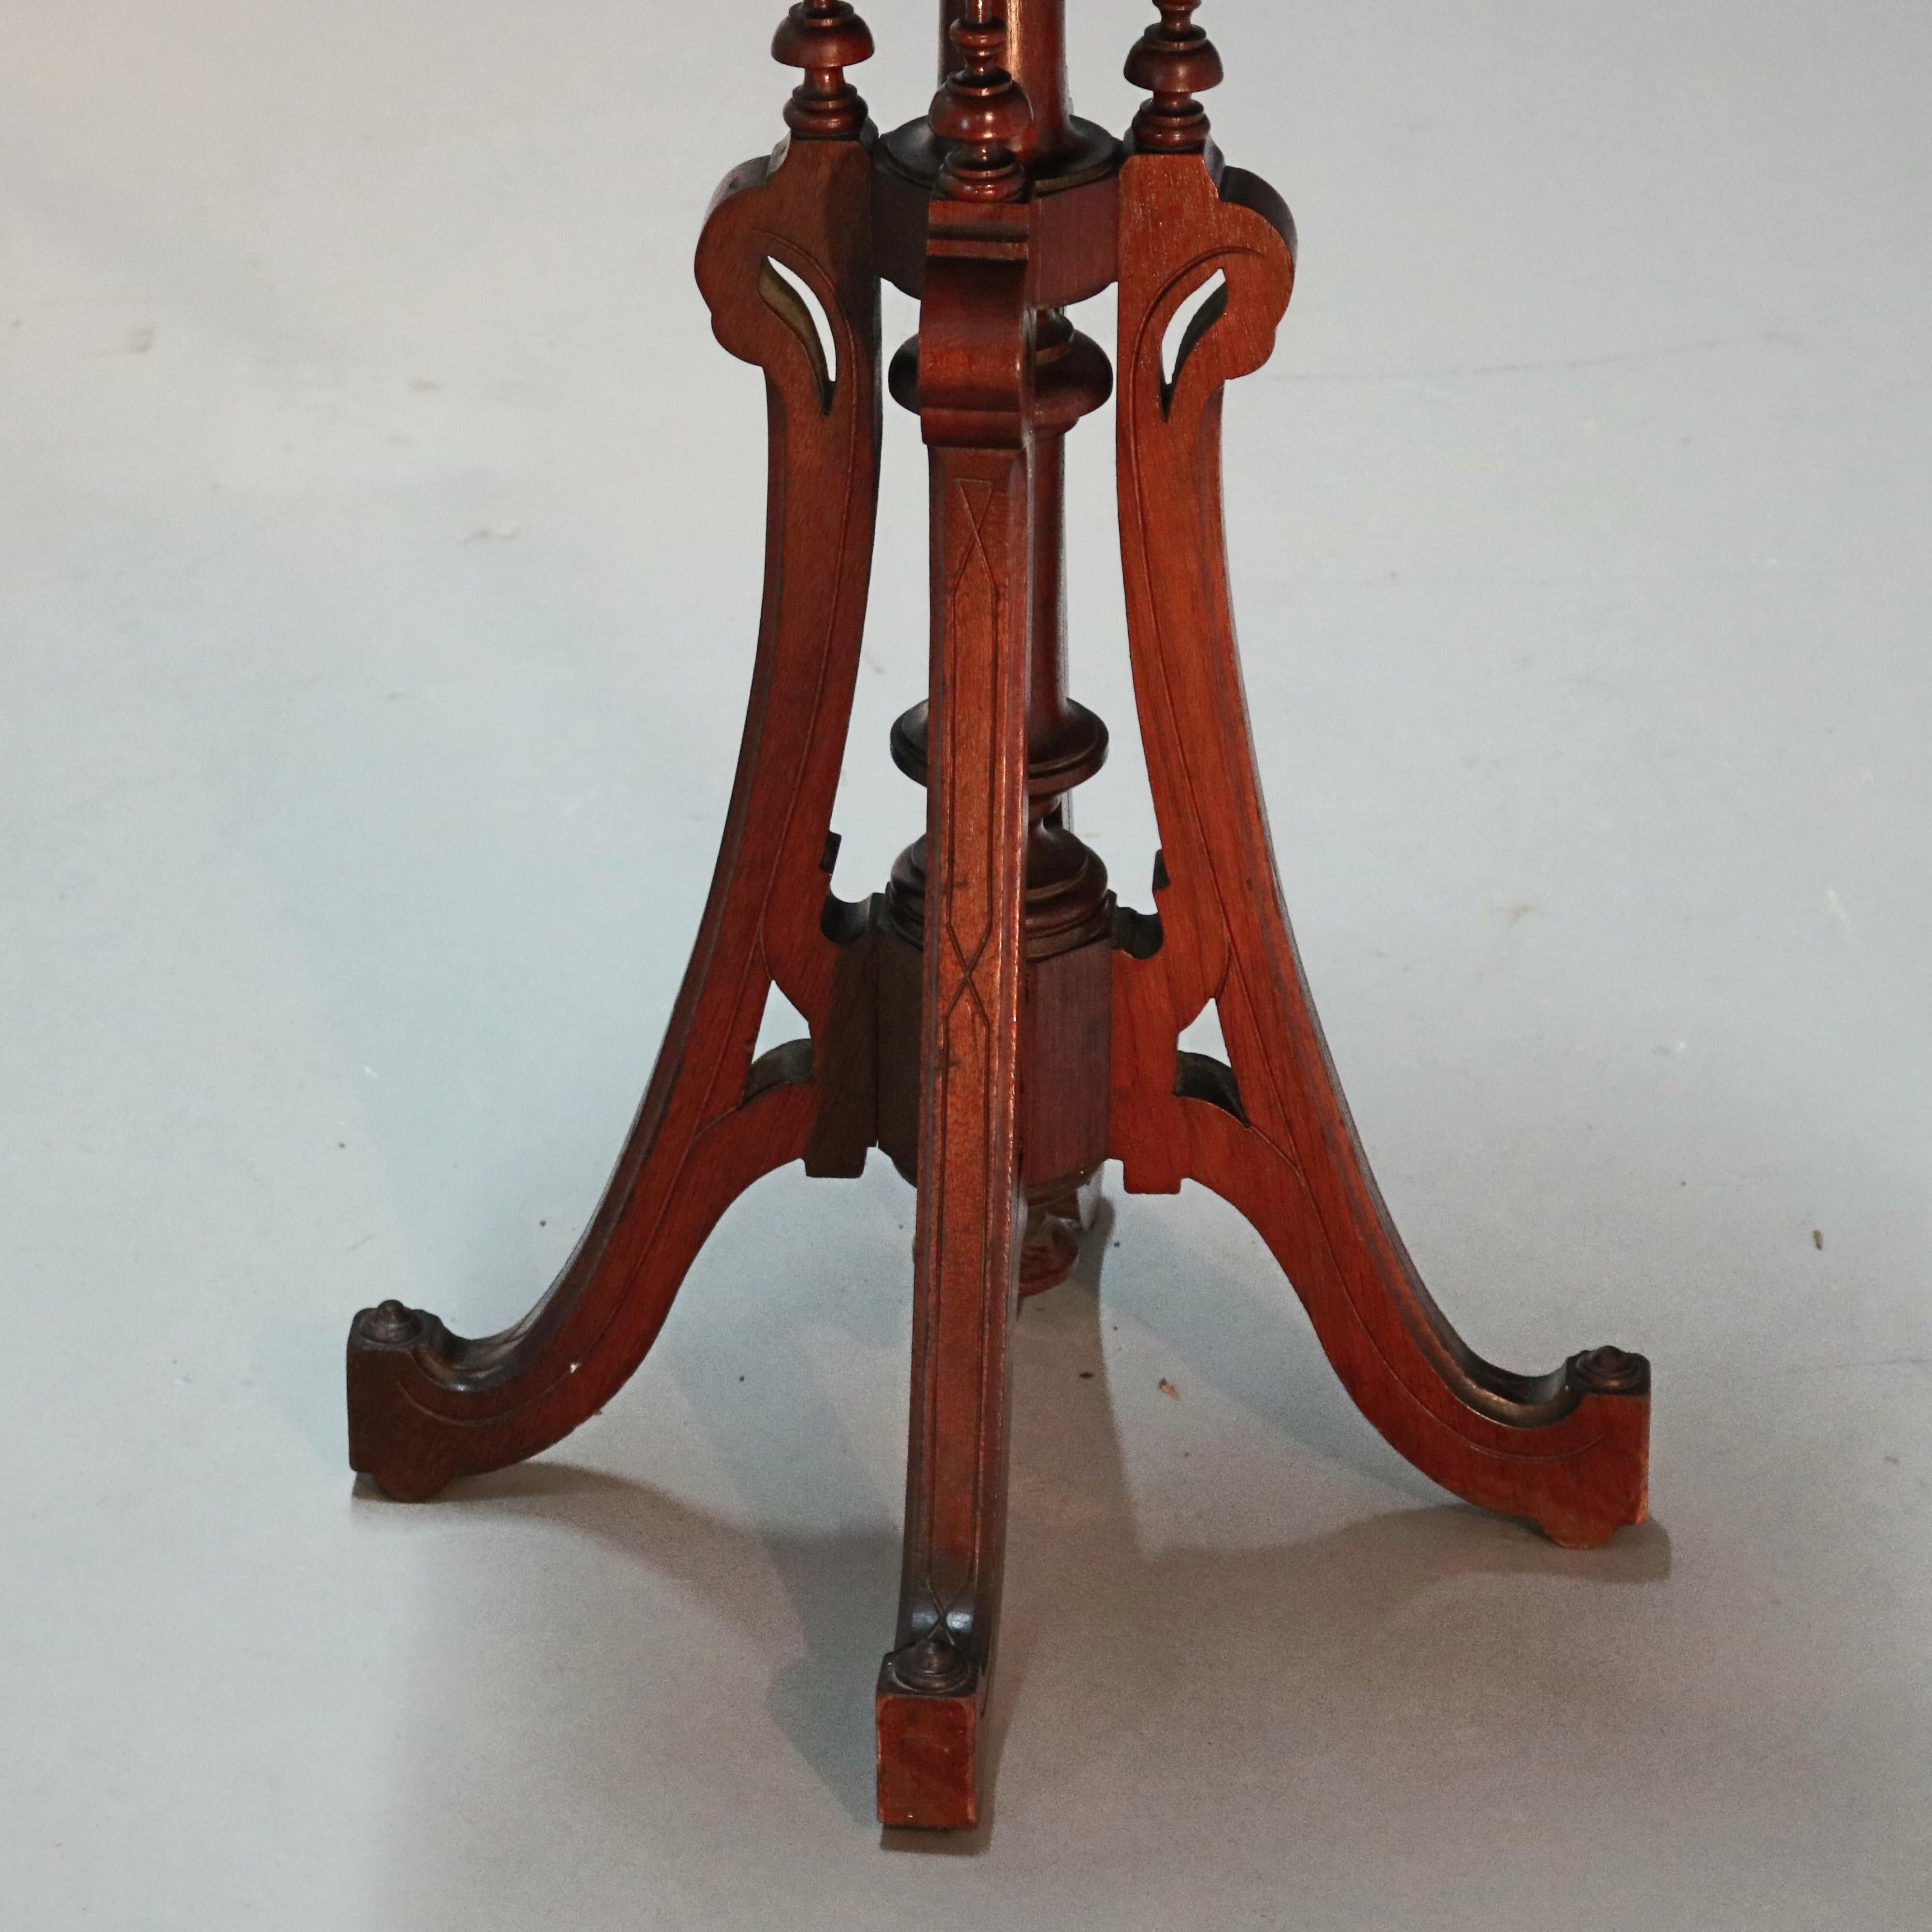 An antique Renaissance Revival fern plant stand offers beveled marble top surmounting walnut base with carved and inscribed shaped skirt raised on turned column having bowed legs with stylized goose head capitals, finials and terminating in stylized